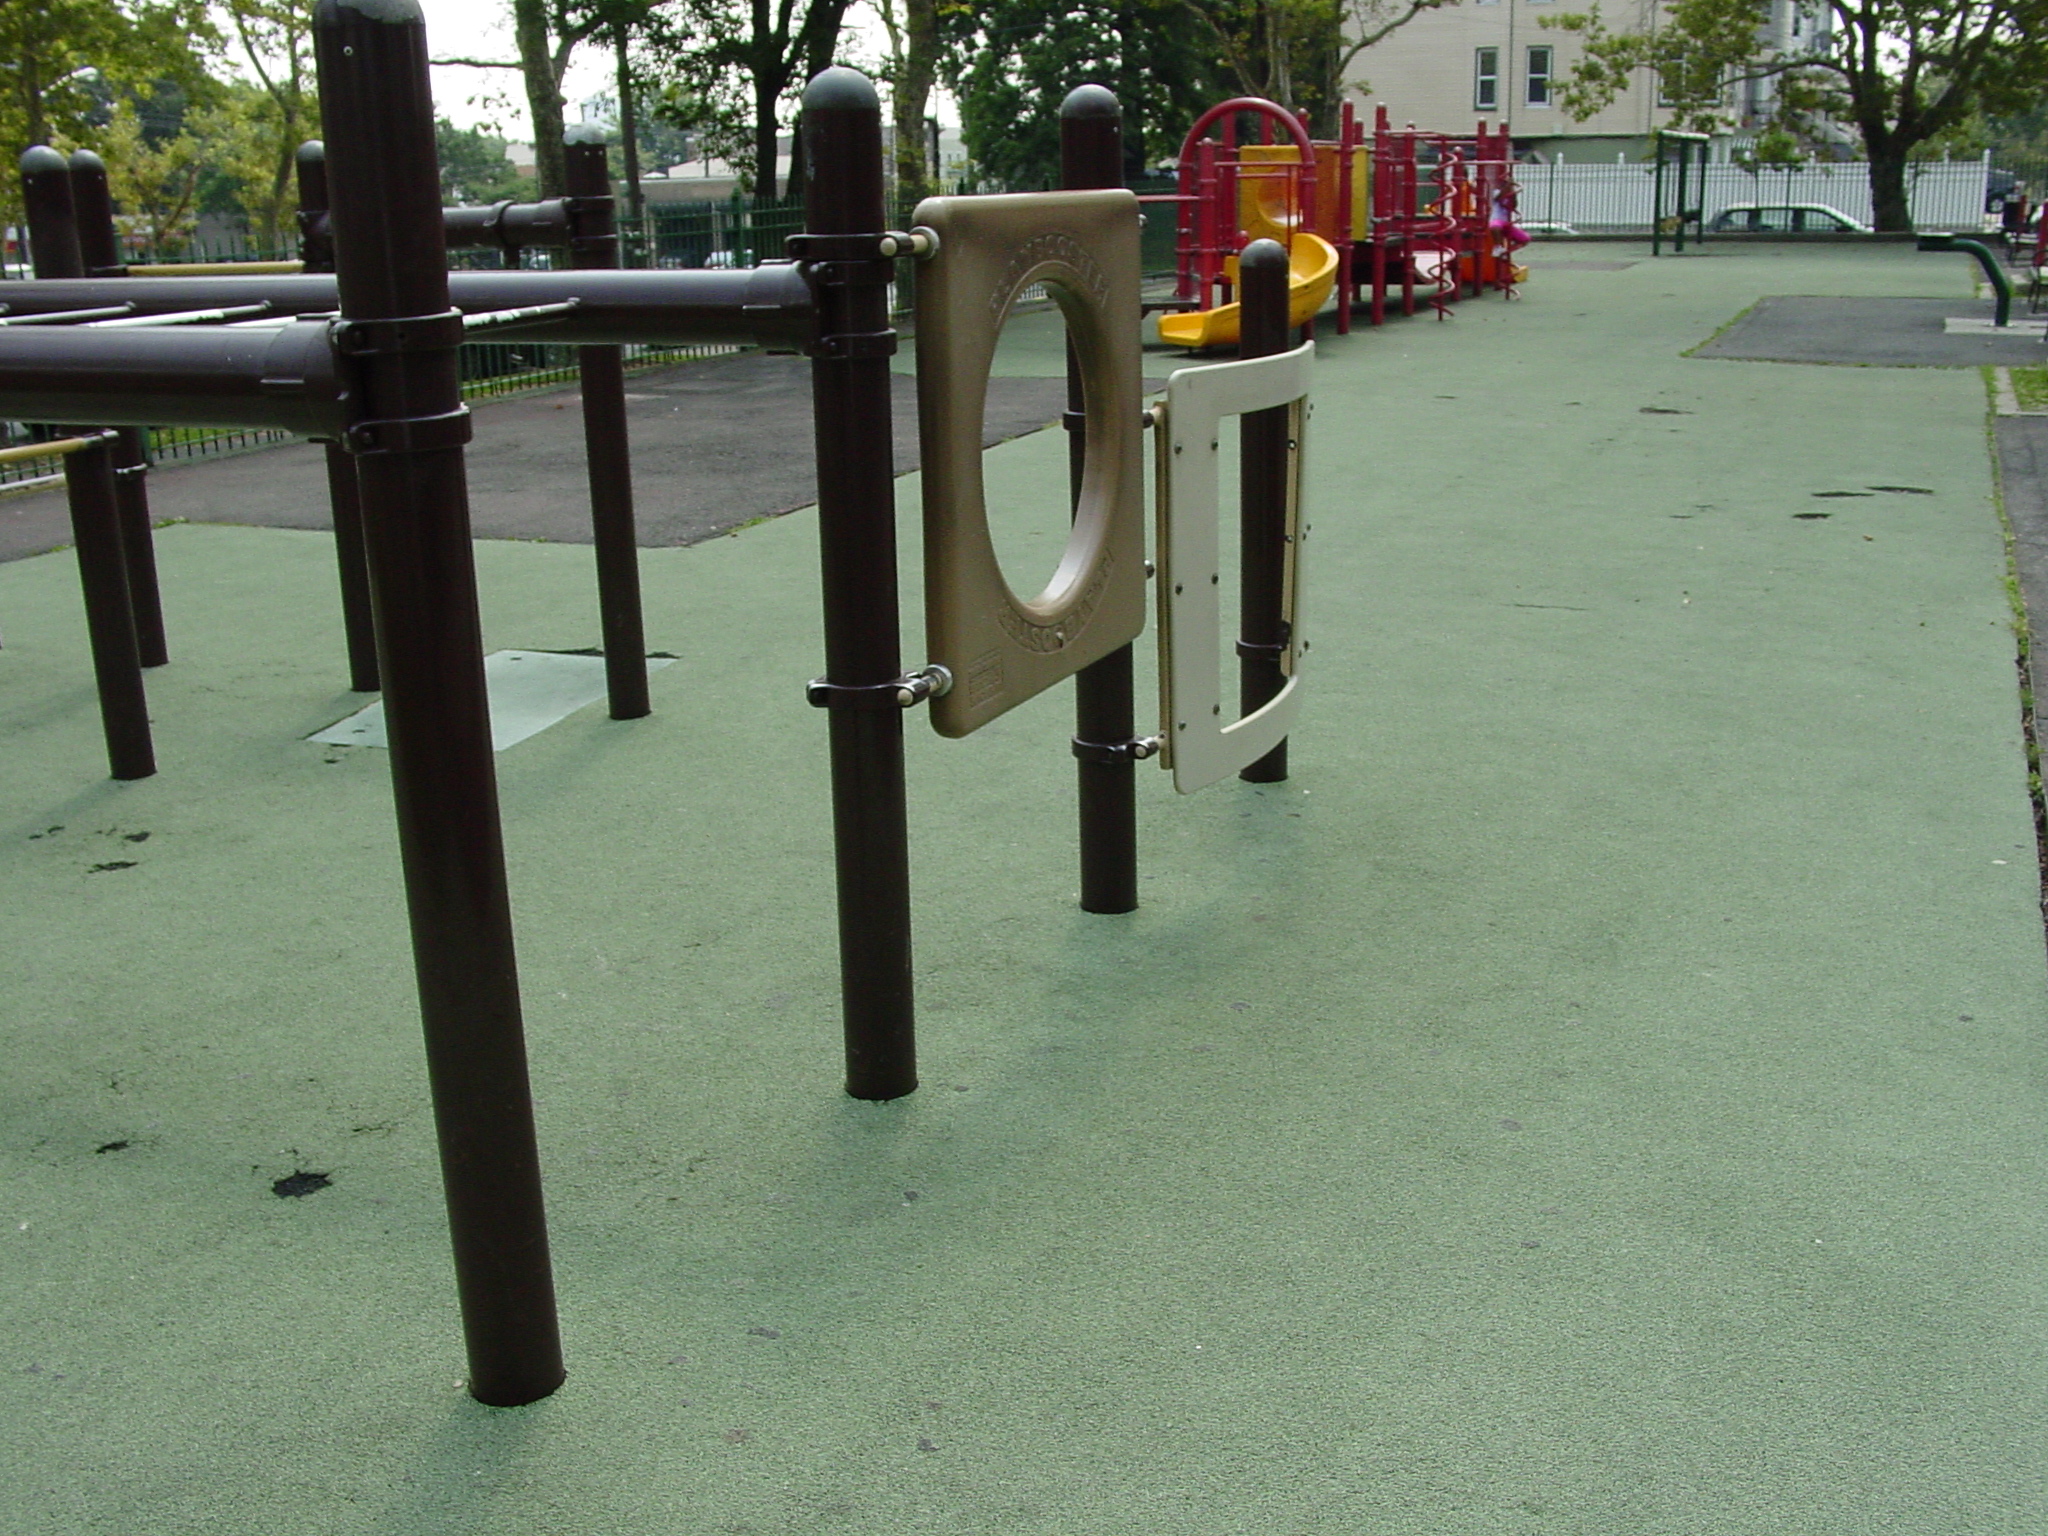 Large Public Park with Multiple Playgrounds Using Designs k